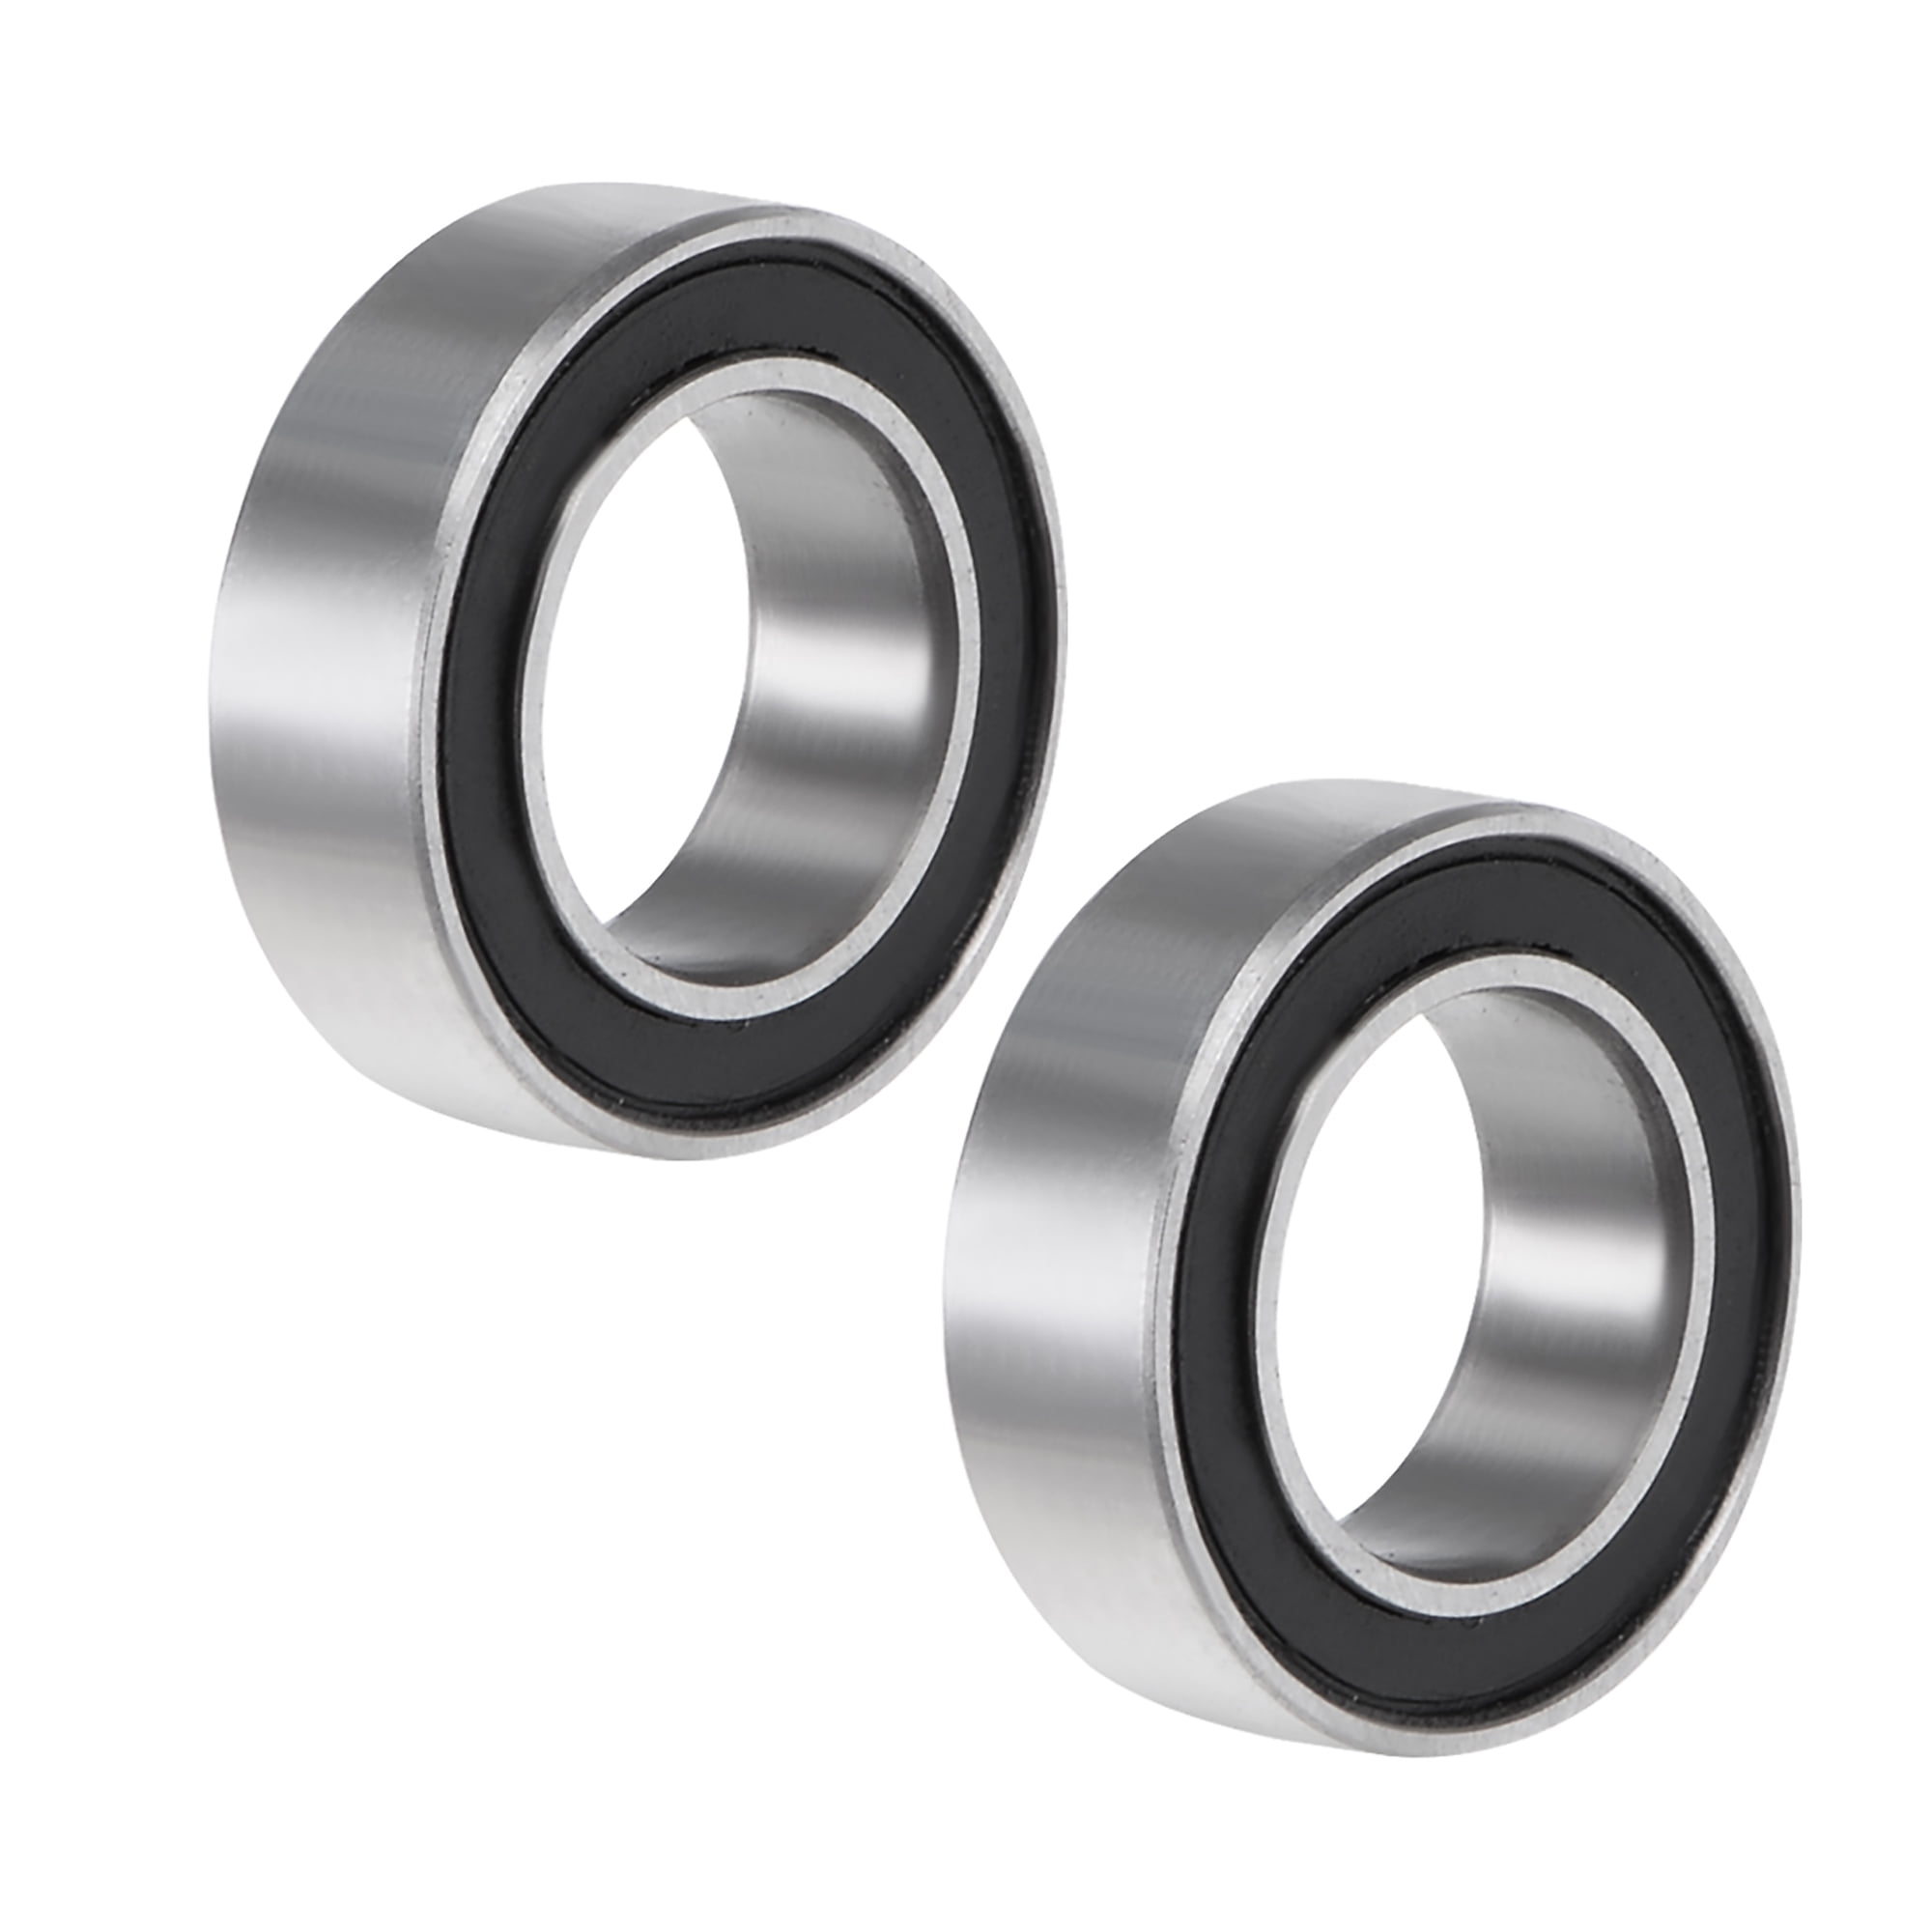 MR106-2RS Deep Groove Ball Bearing 6x10x3mm Double Sealed ABEC-3 Bearing  2-Pack 